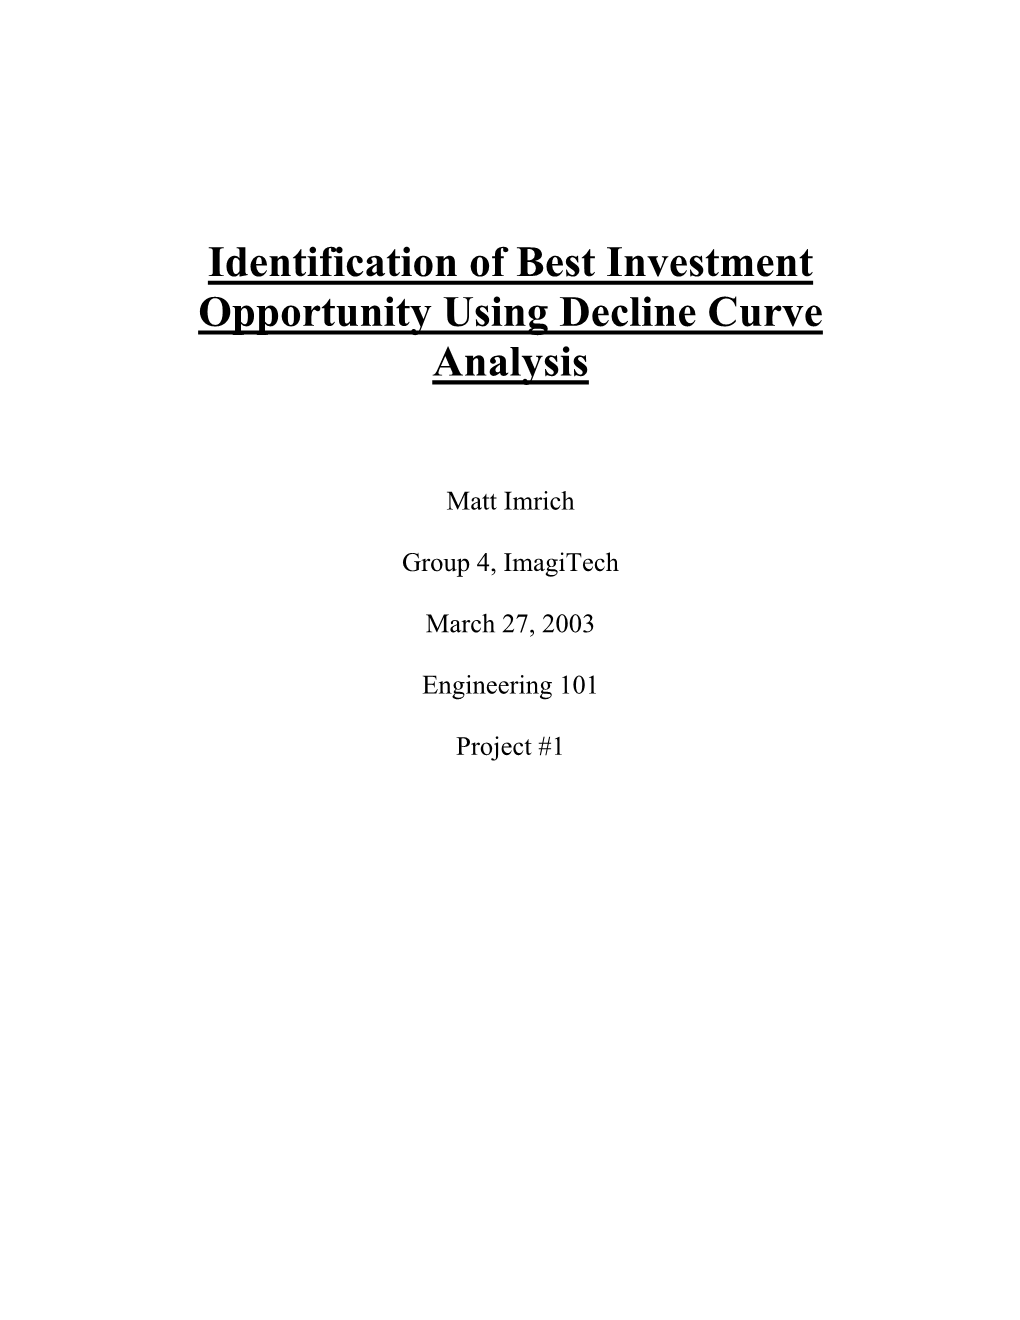 Identification of Best Investment Opportunity Using Decline Curve Analysis